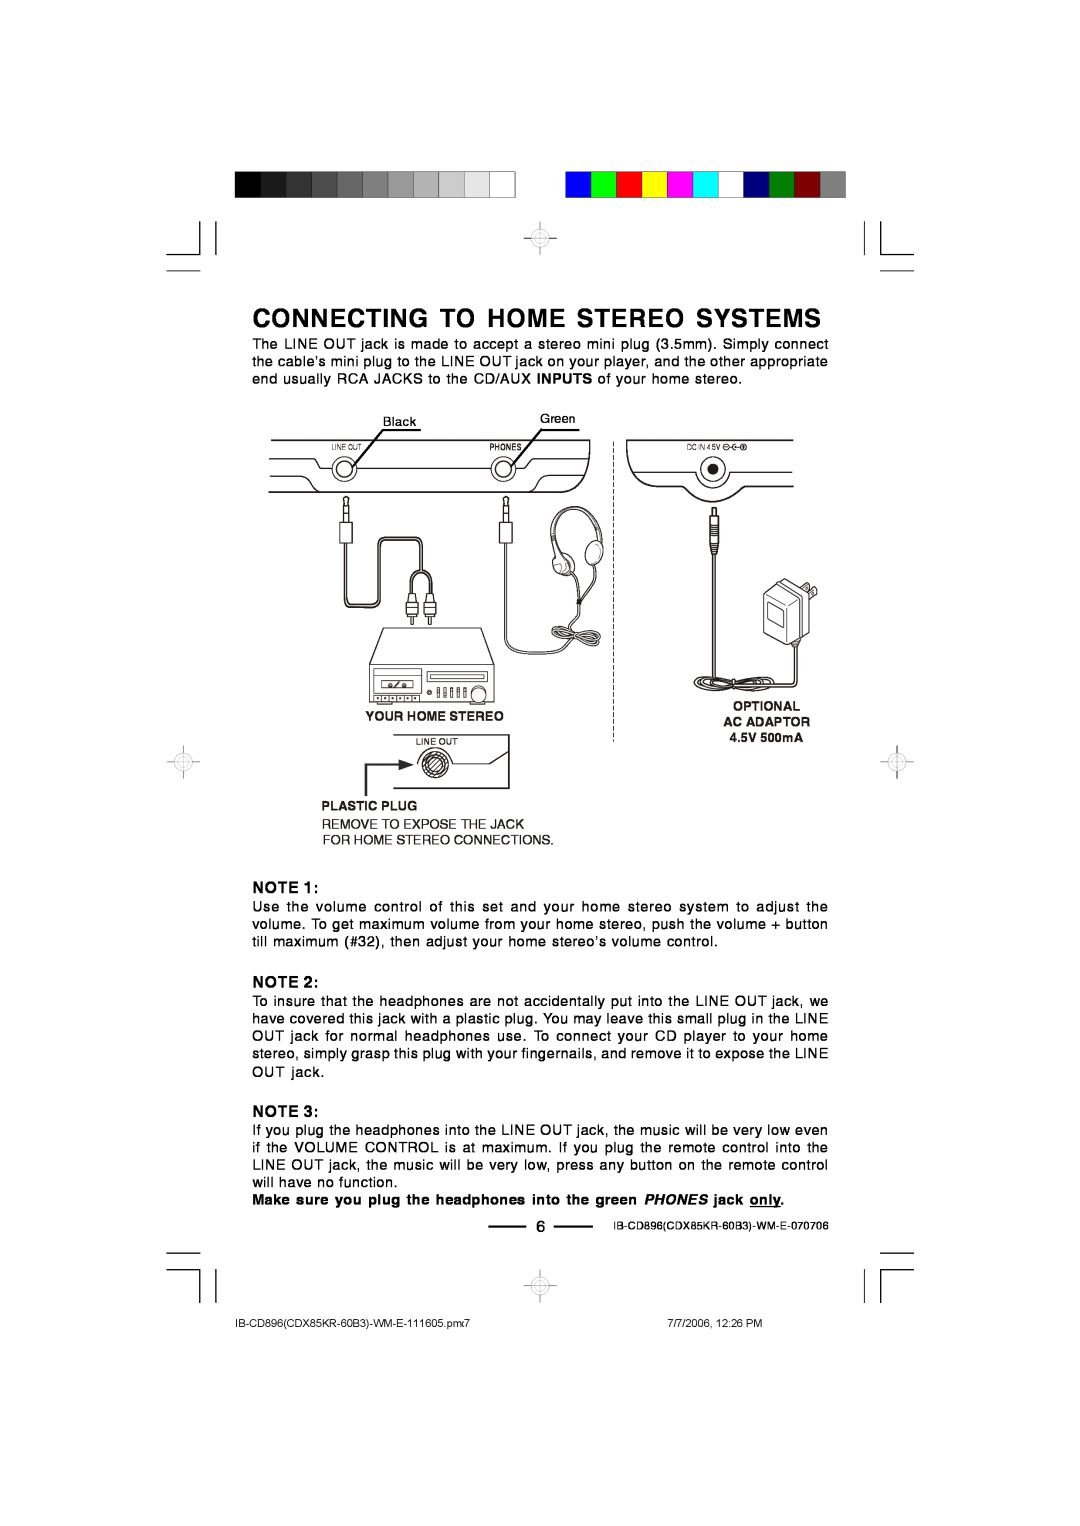 Lenoxx Electronics CD-896 operating instructions Connecting To Home Stereo Systems, Plastic Plug 